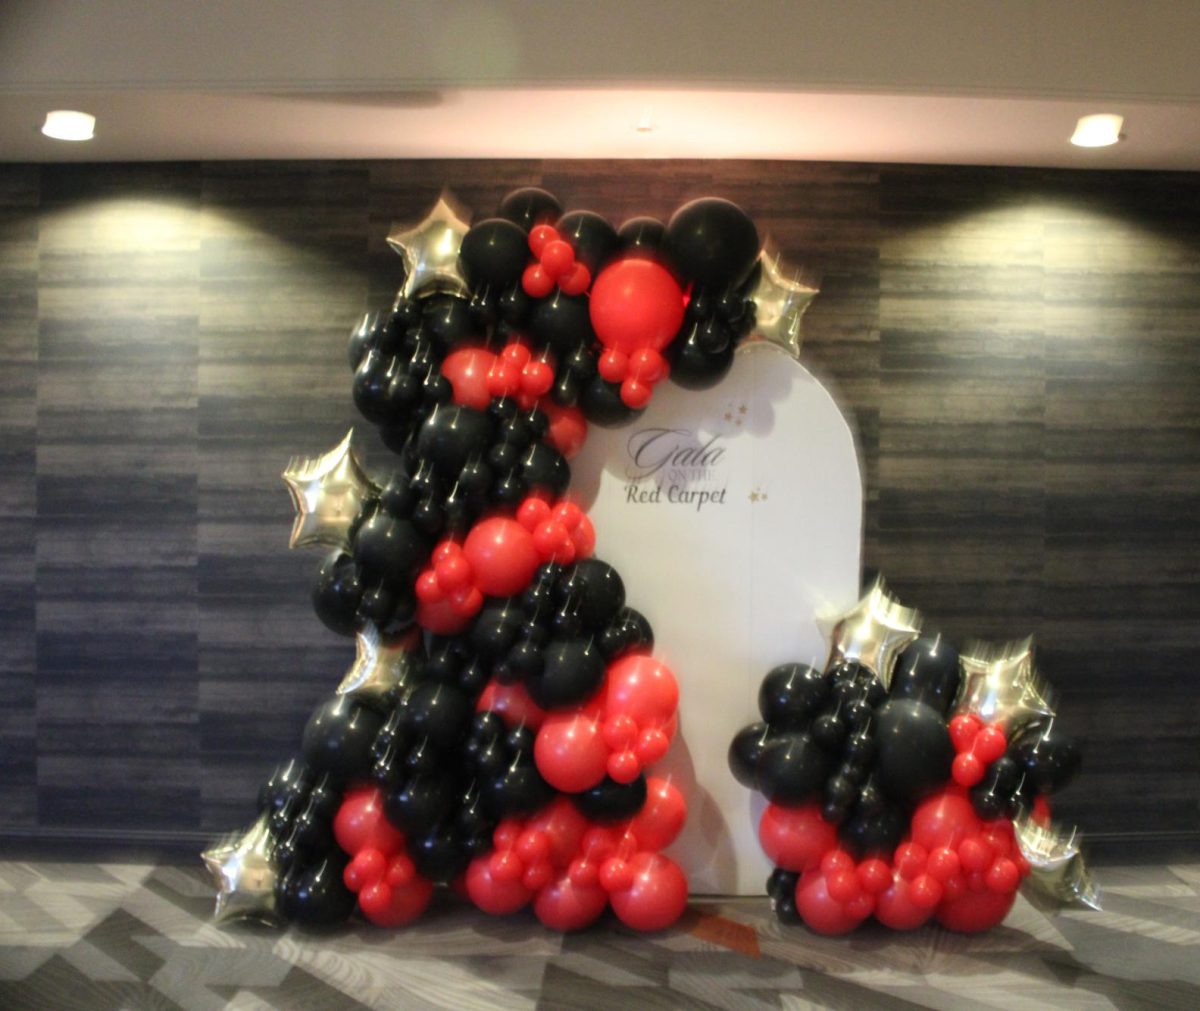 Decoration of the prom event at the Antlers Double Tree hotel. (May 4, 2024)